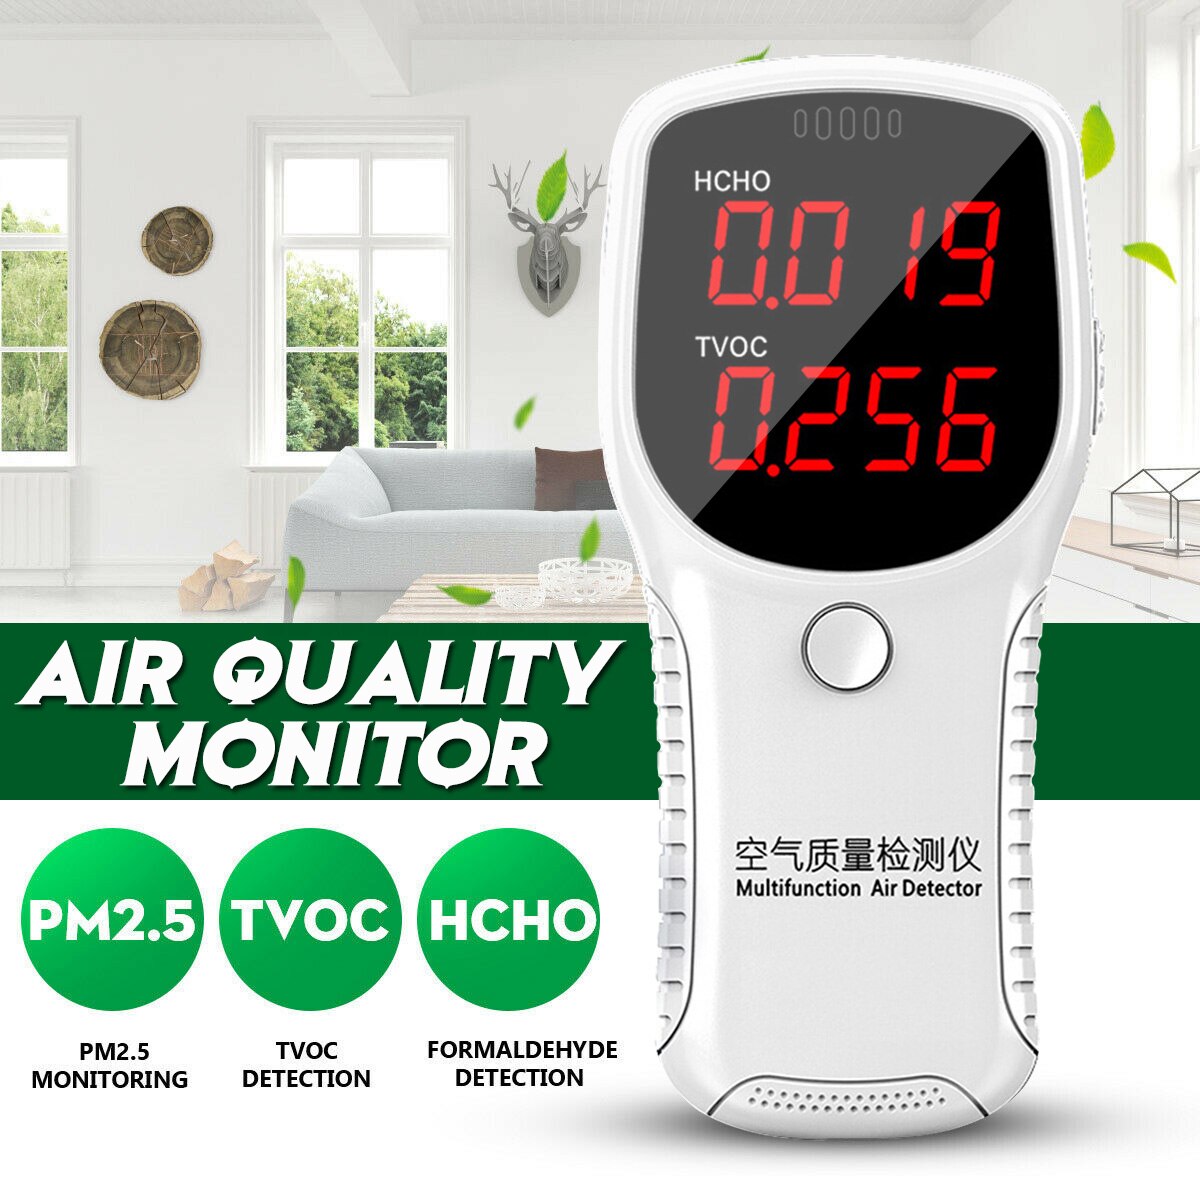 Portaportable Lcd Digitale Monitor Luchtkwaliteit Monitor Hcho Tvoc PM2.5 PM10 Formaldehyde Detector Tester Thuis Test